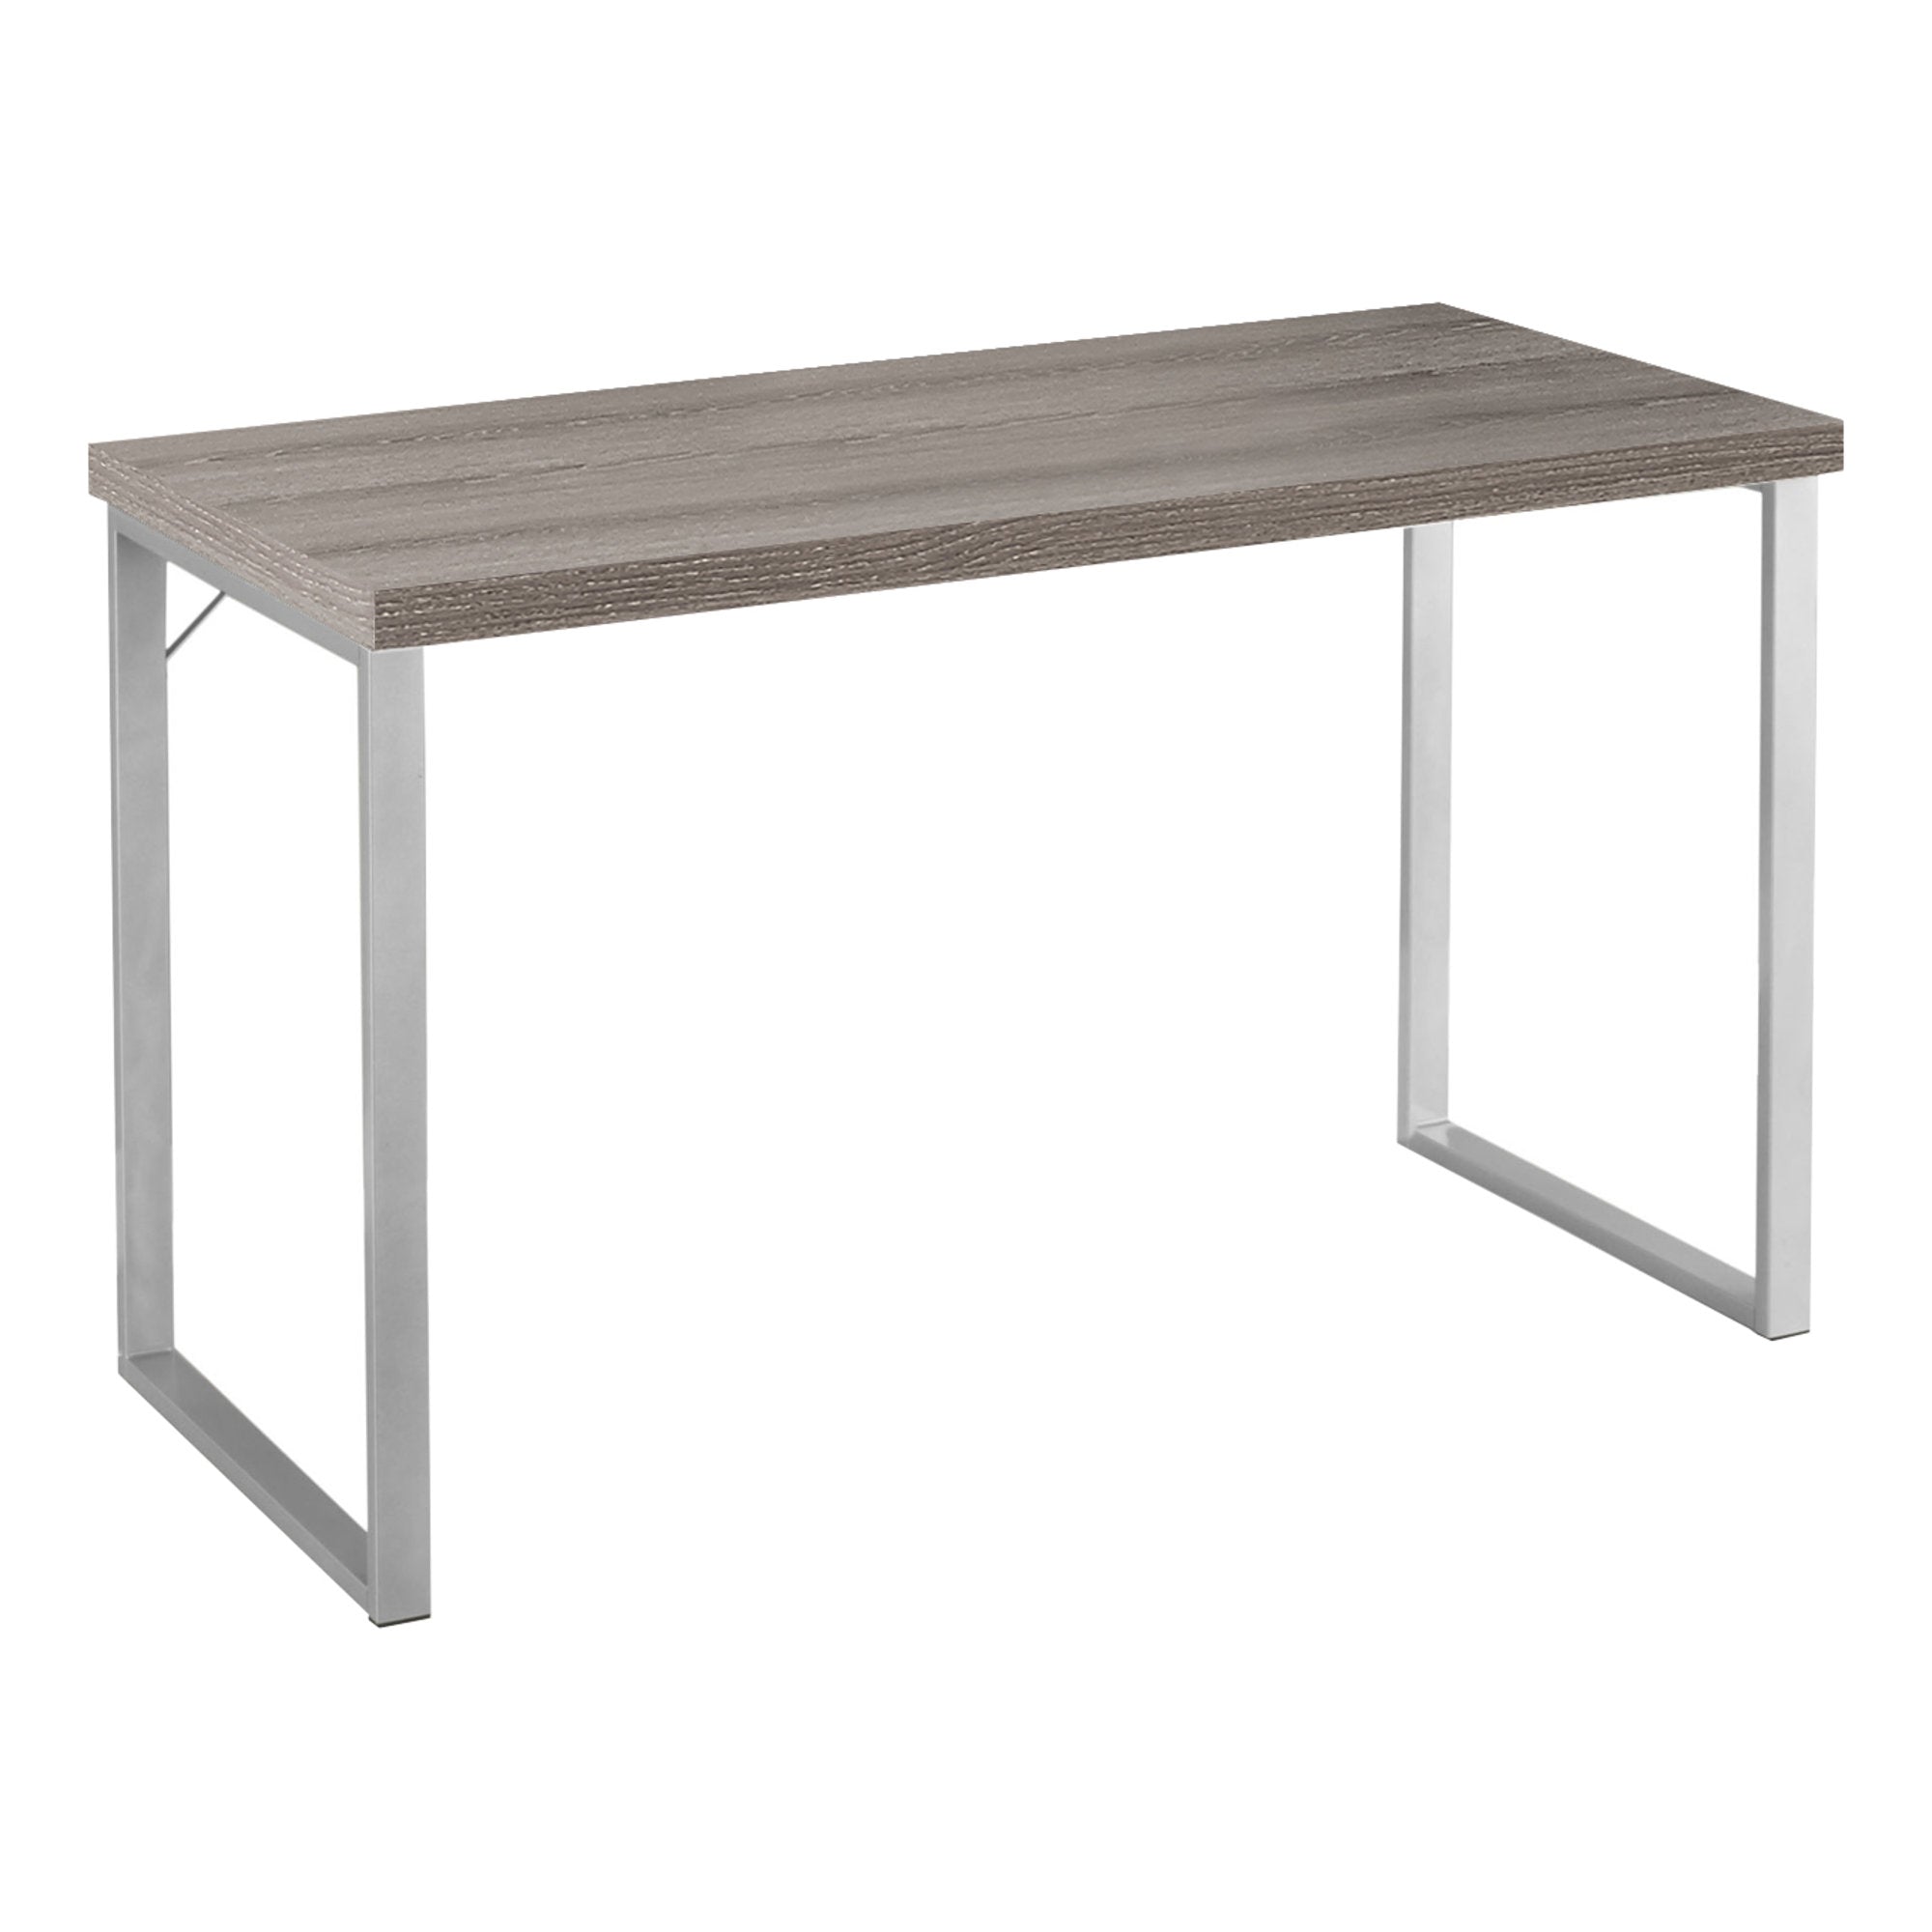 MN-267155    Computer Desk, Home Office, Laptop, 48"L, Metal, Laminate, Dark Taupe, Silver, Contemporary, Modern